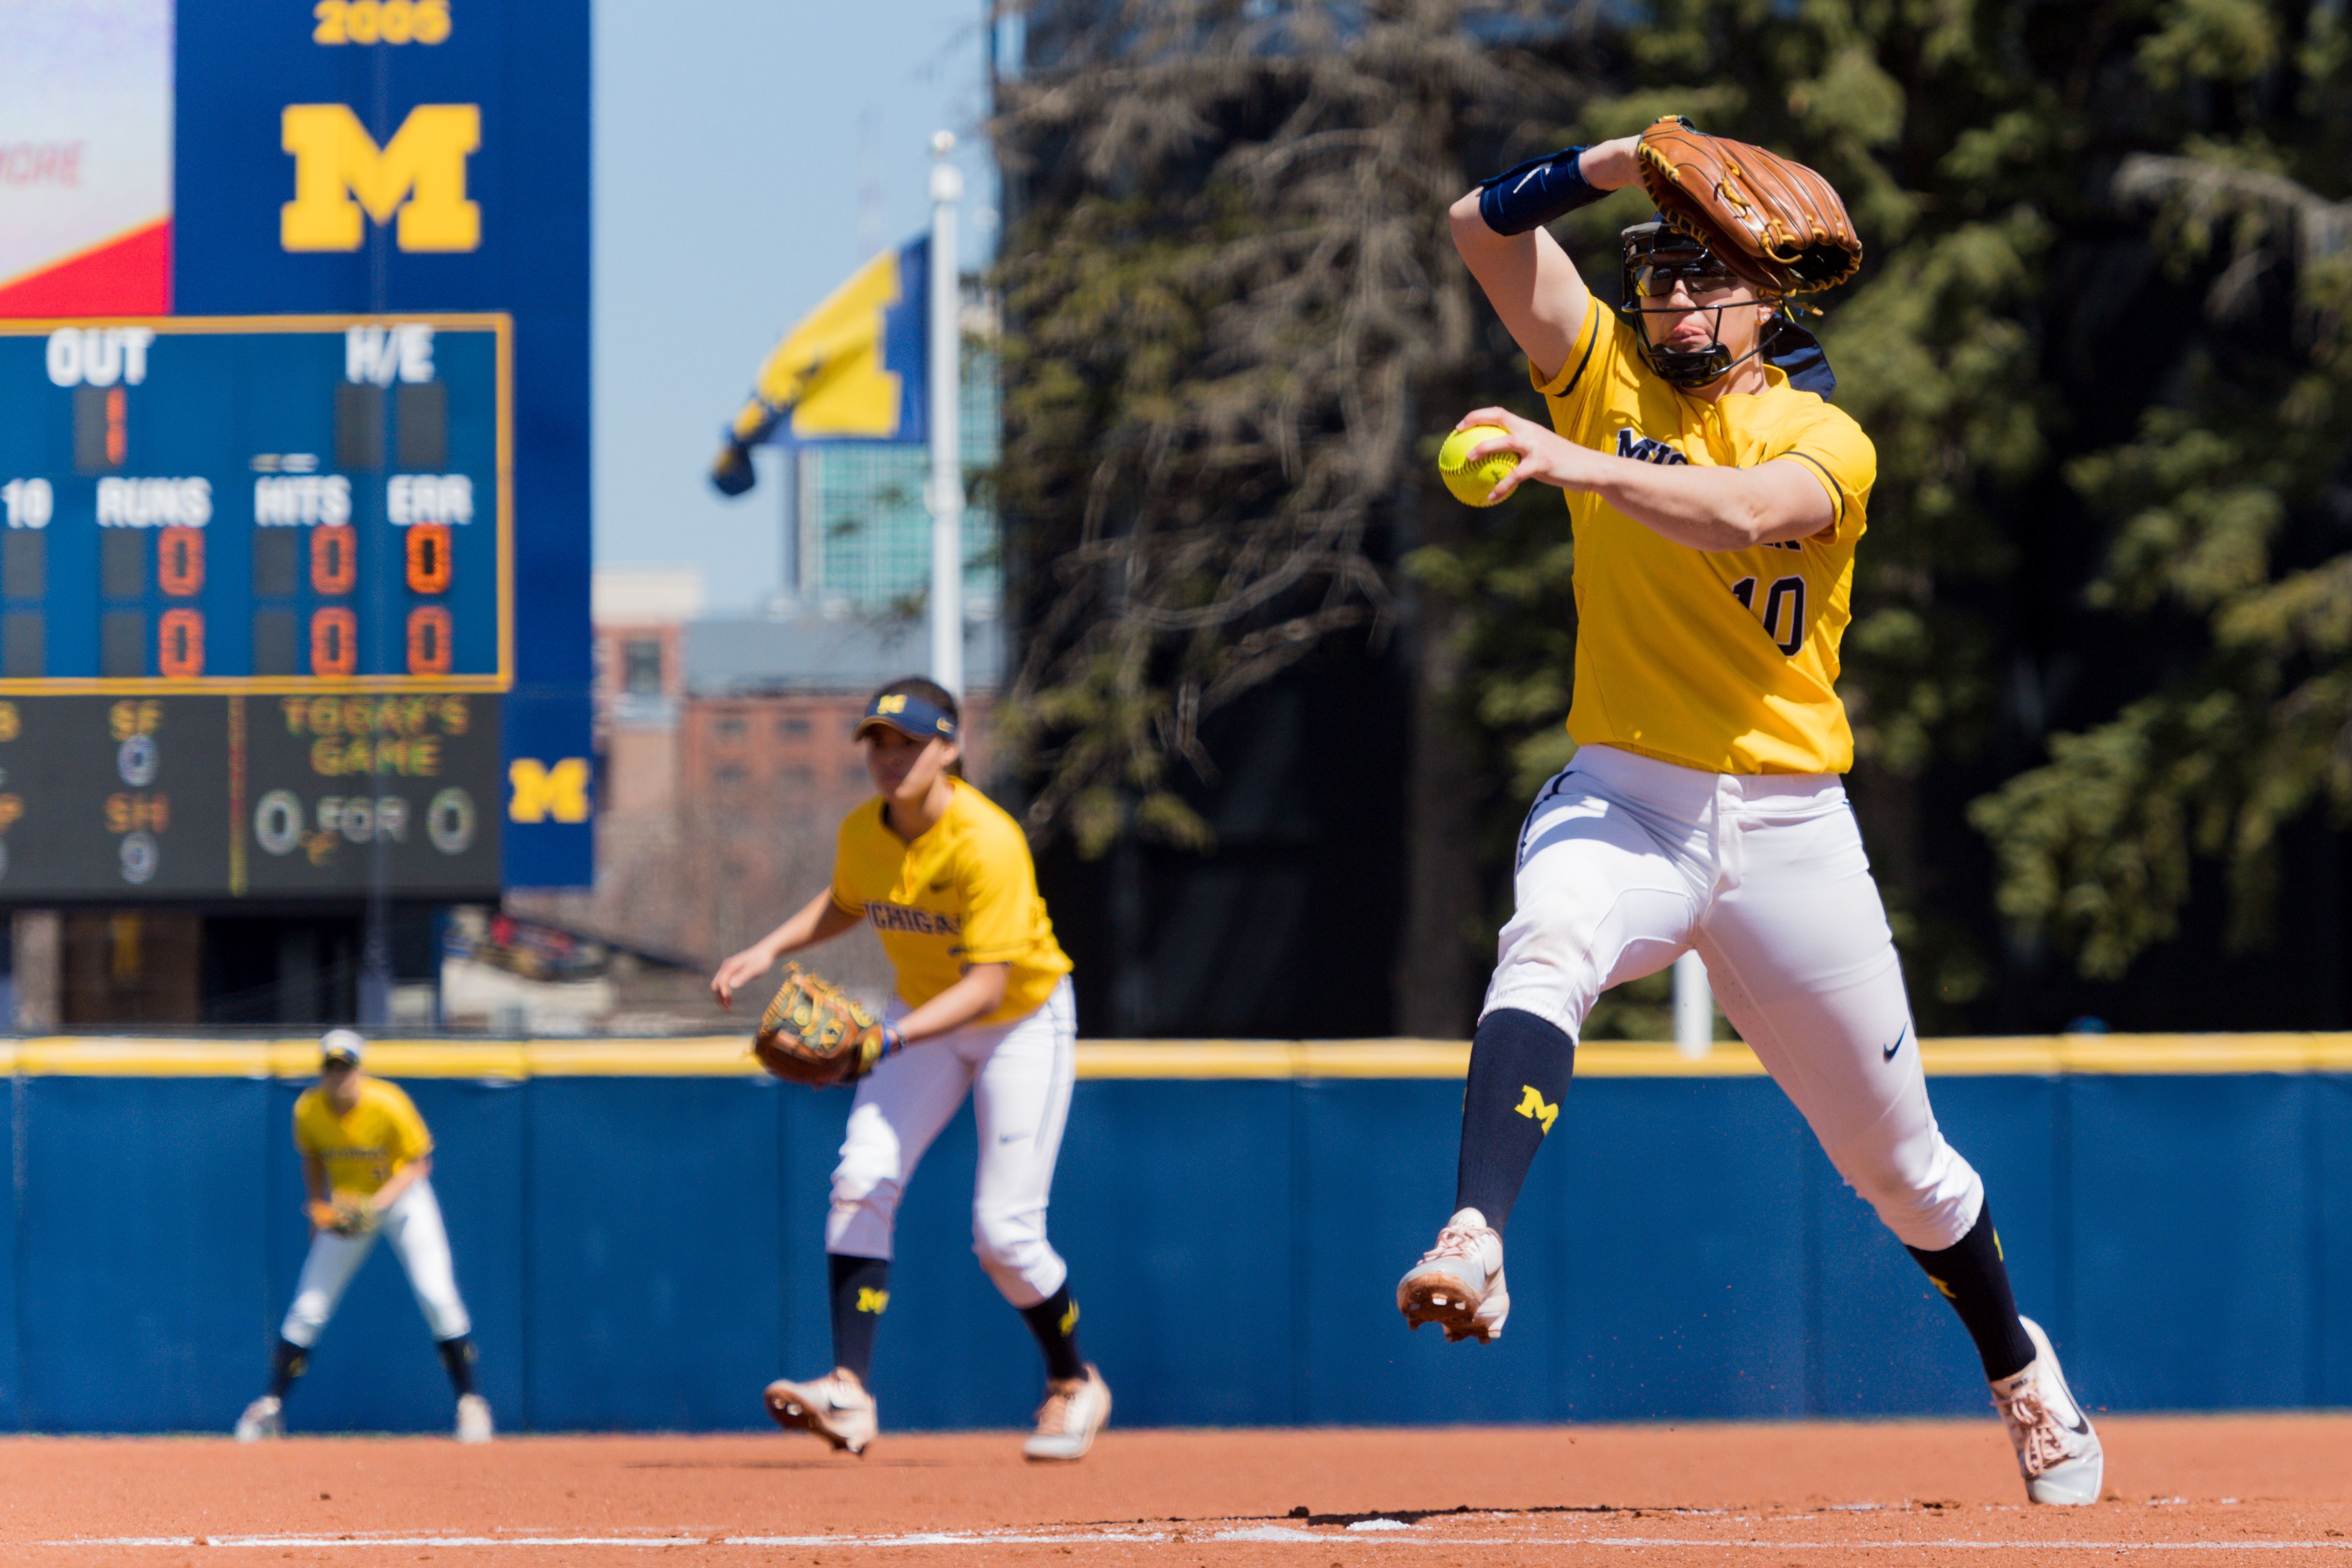 Michigan pitcher Meghan Beaubien throws against Maryland on April 22, 2018.